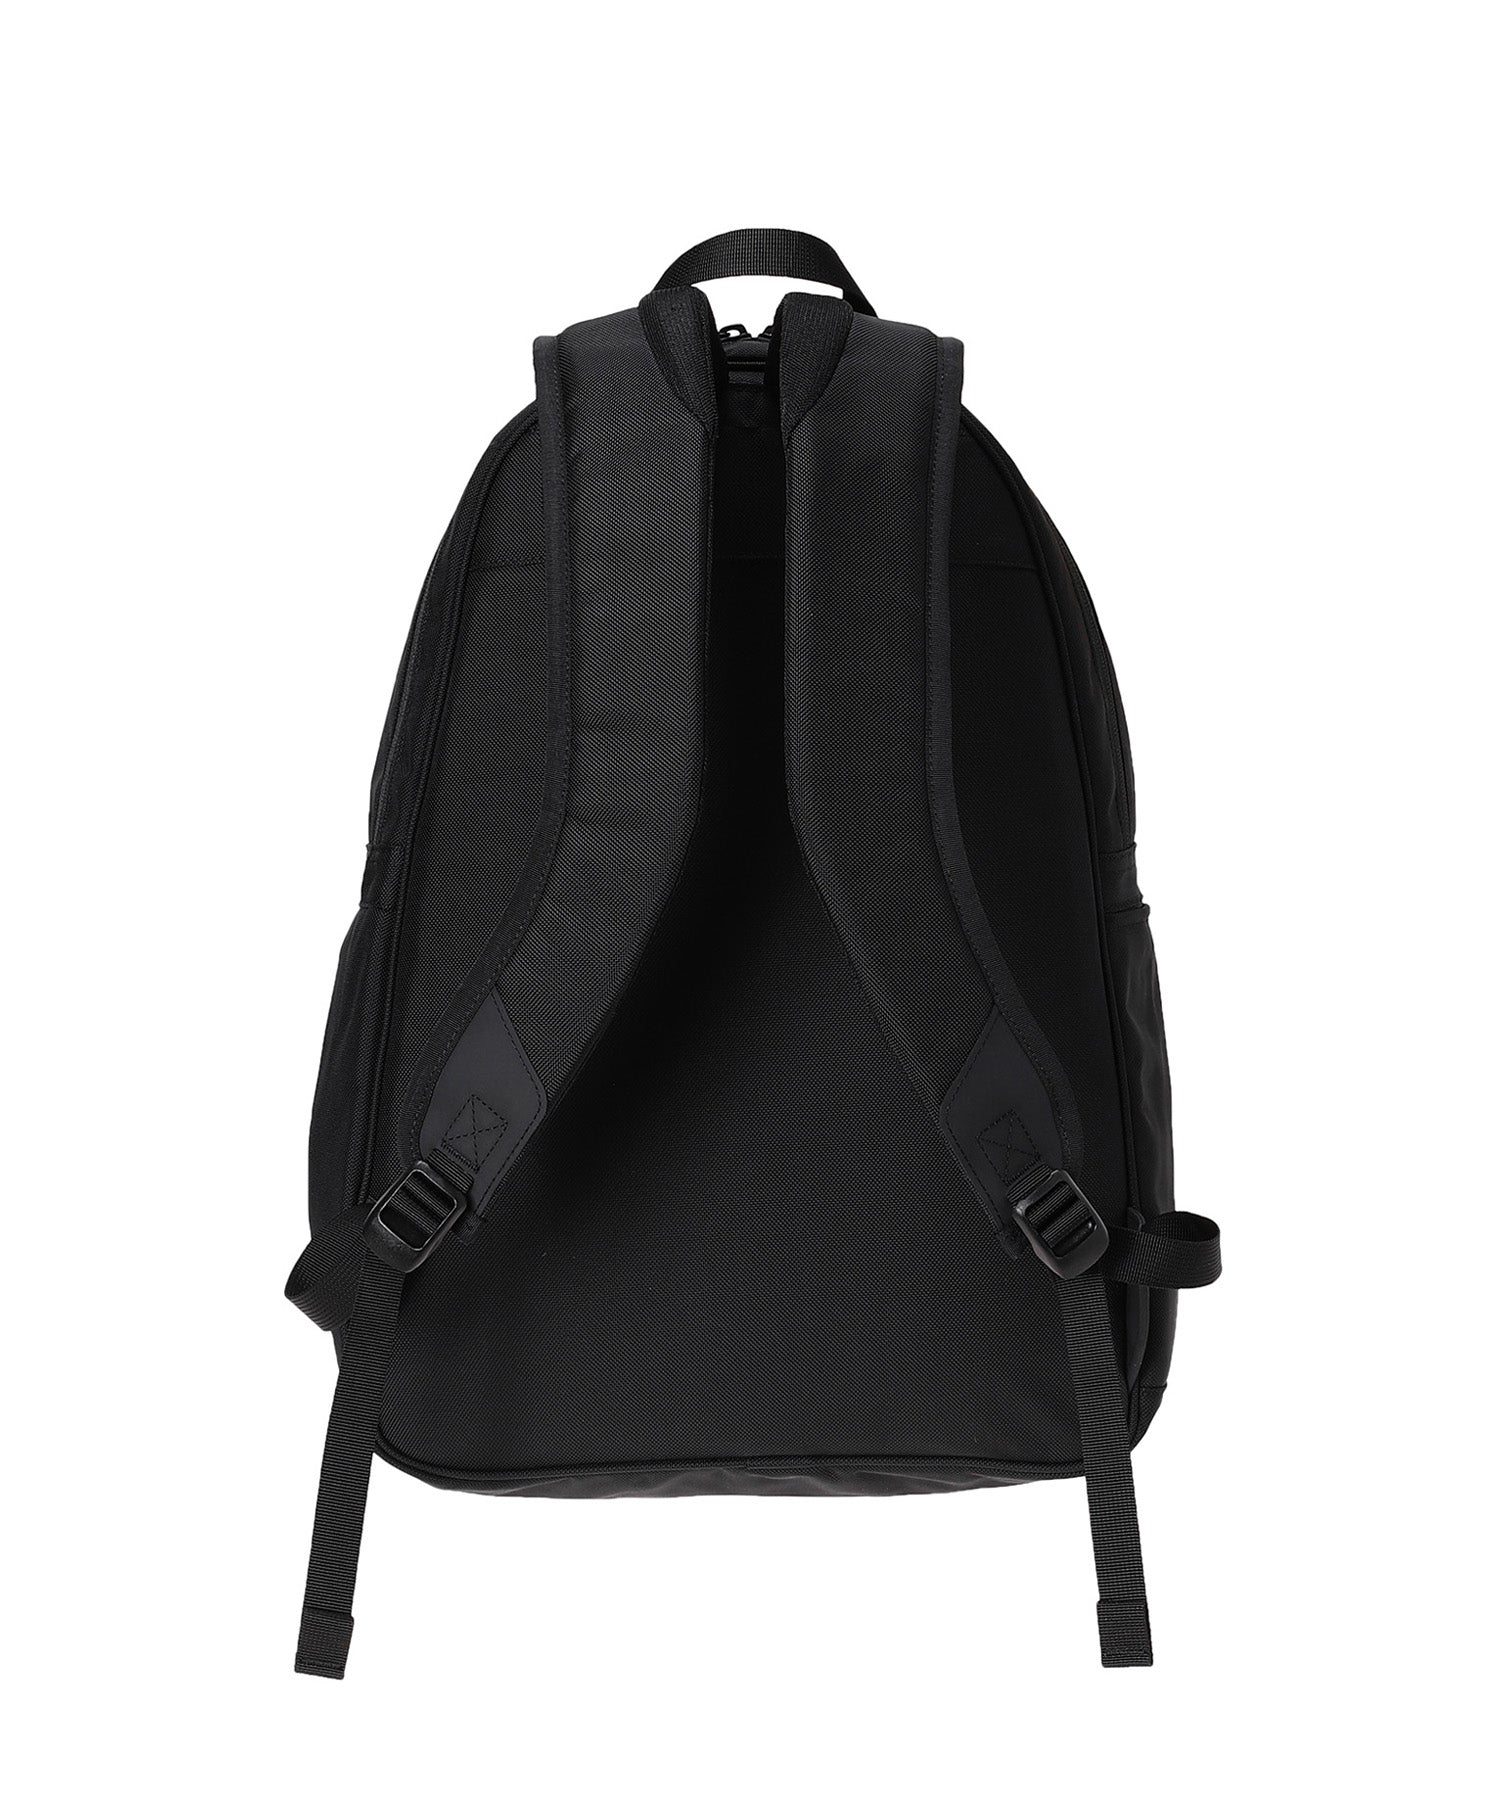 BACKPACK OFFICE S